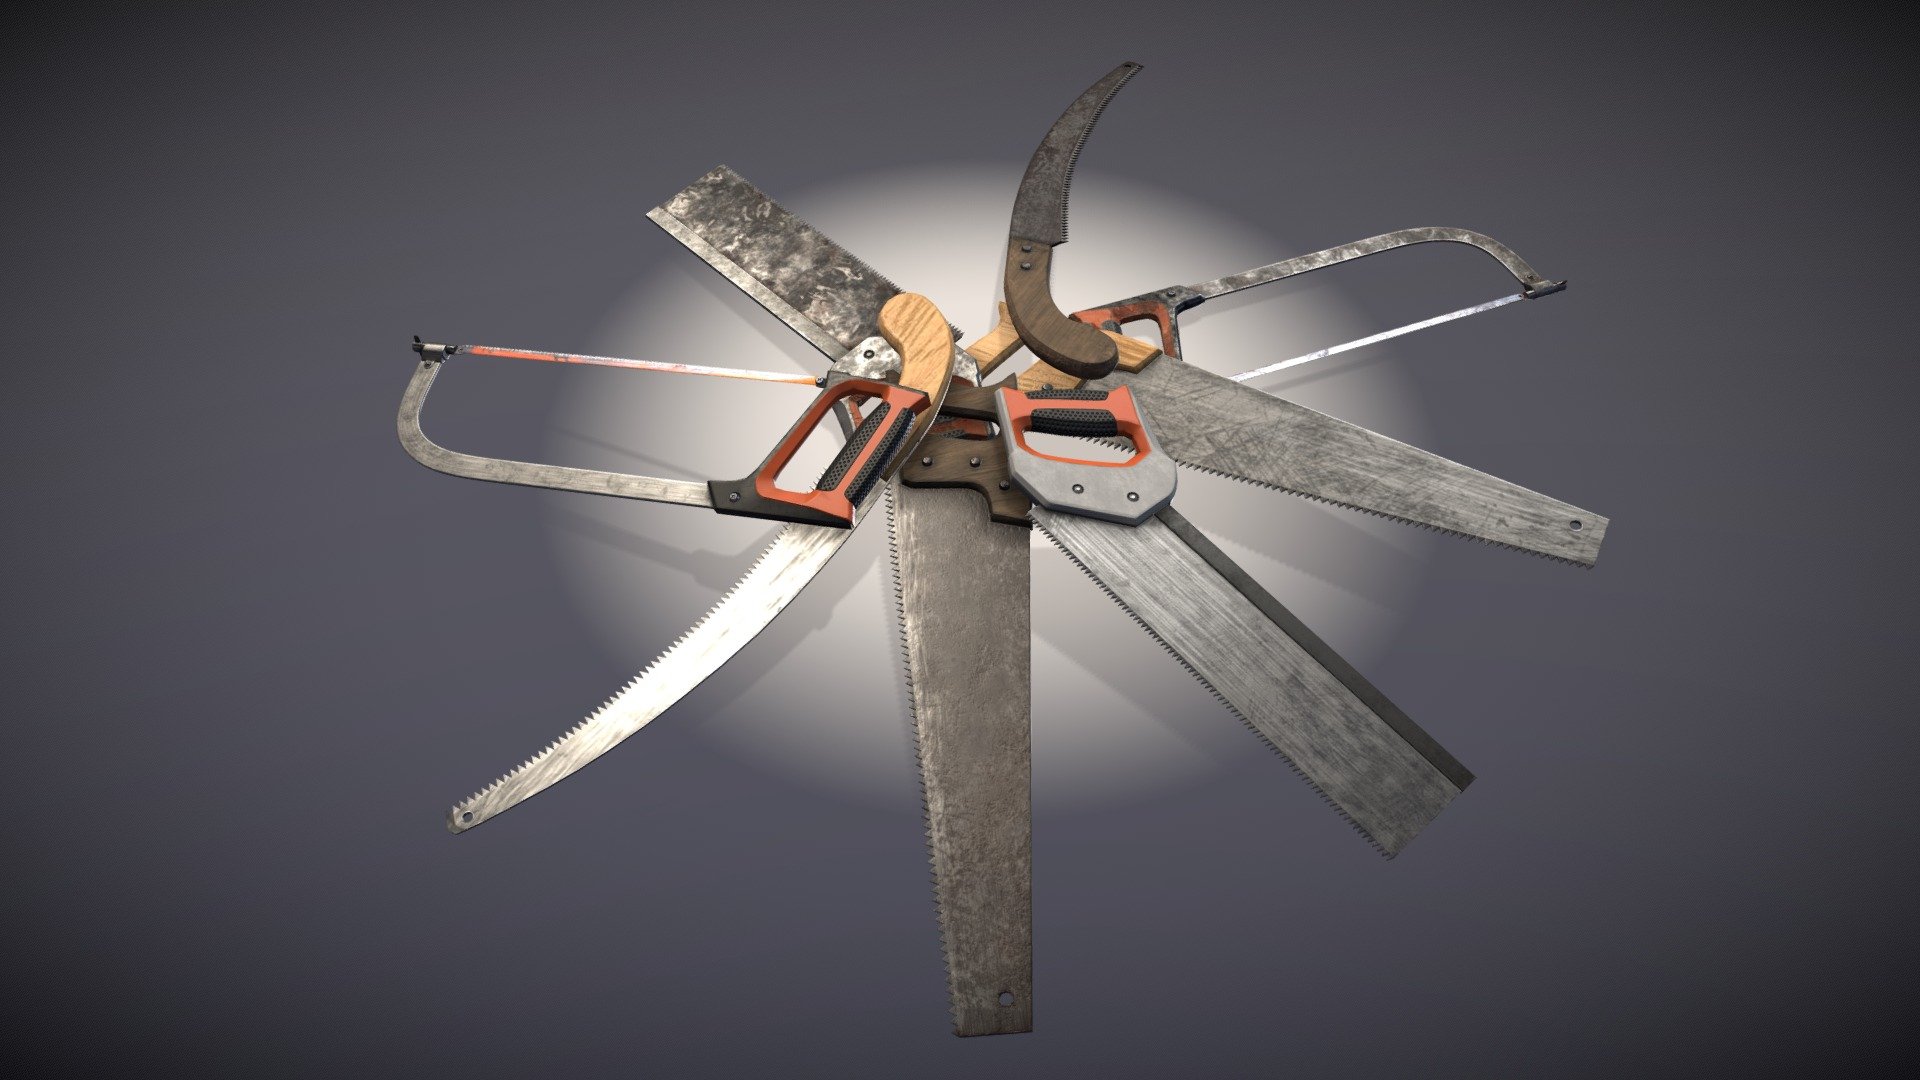 Collection of Saws - Hacksaw - Pruning Saw - Modern Saw - Old Saw - Includes Clean/Used and Dirty/Dilapidated variant texture set.


2k PBR Textures • Albedo • Metalness • Roughness • Normal • AO


Additional file contains .fbx of each asset centered and all textures 3d model